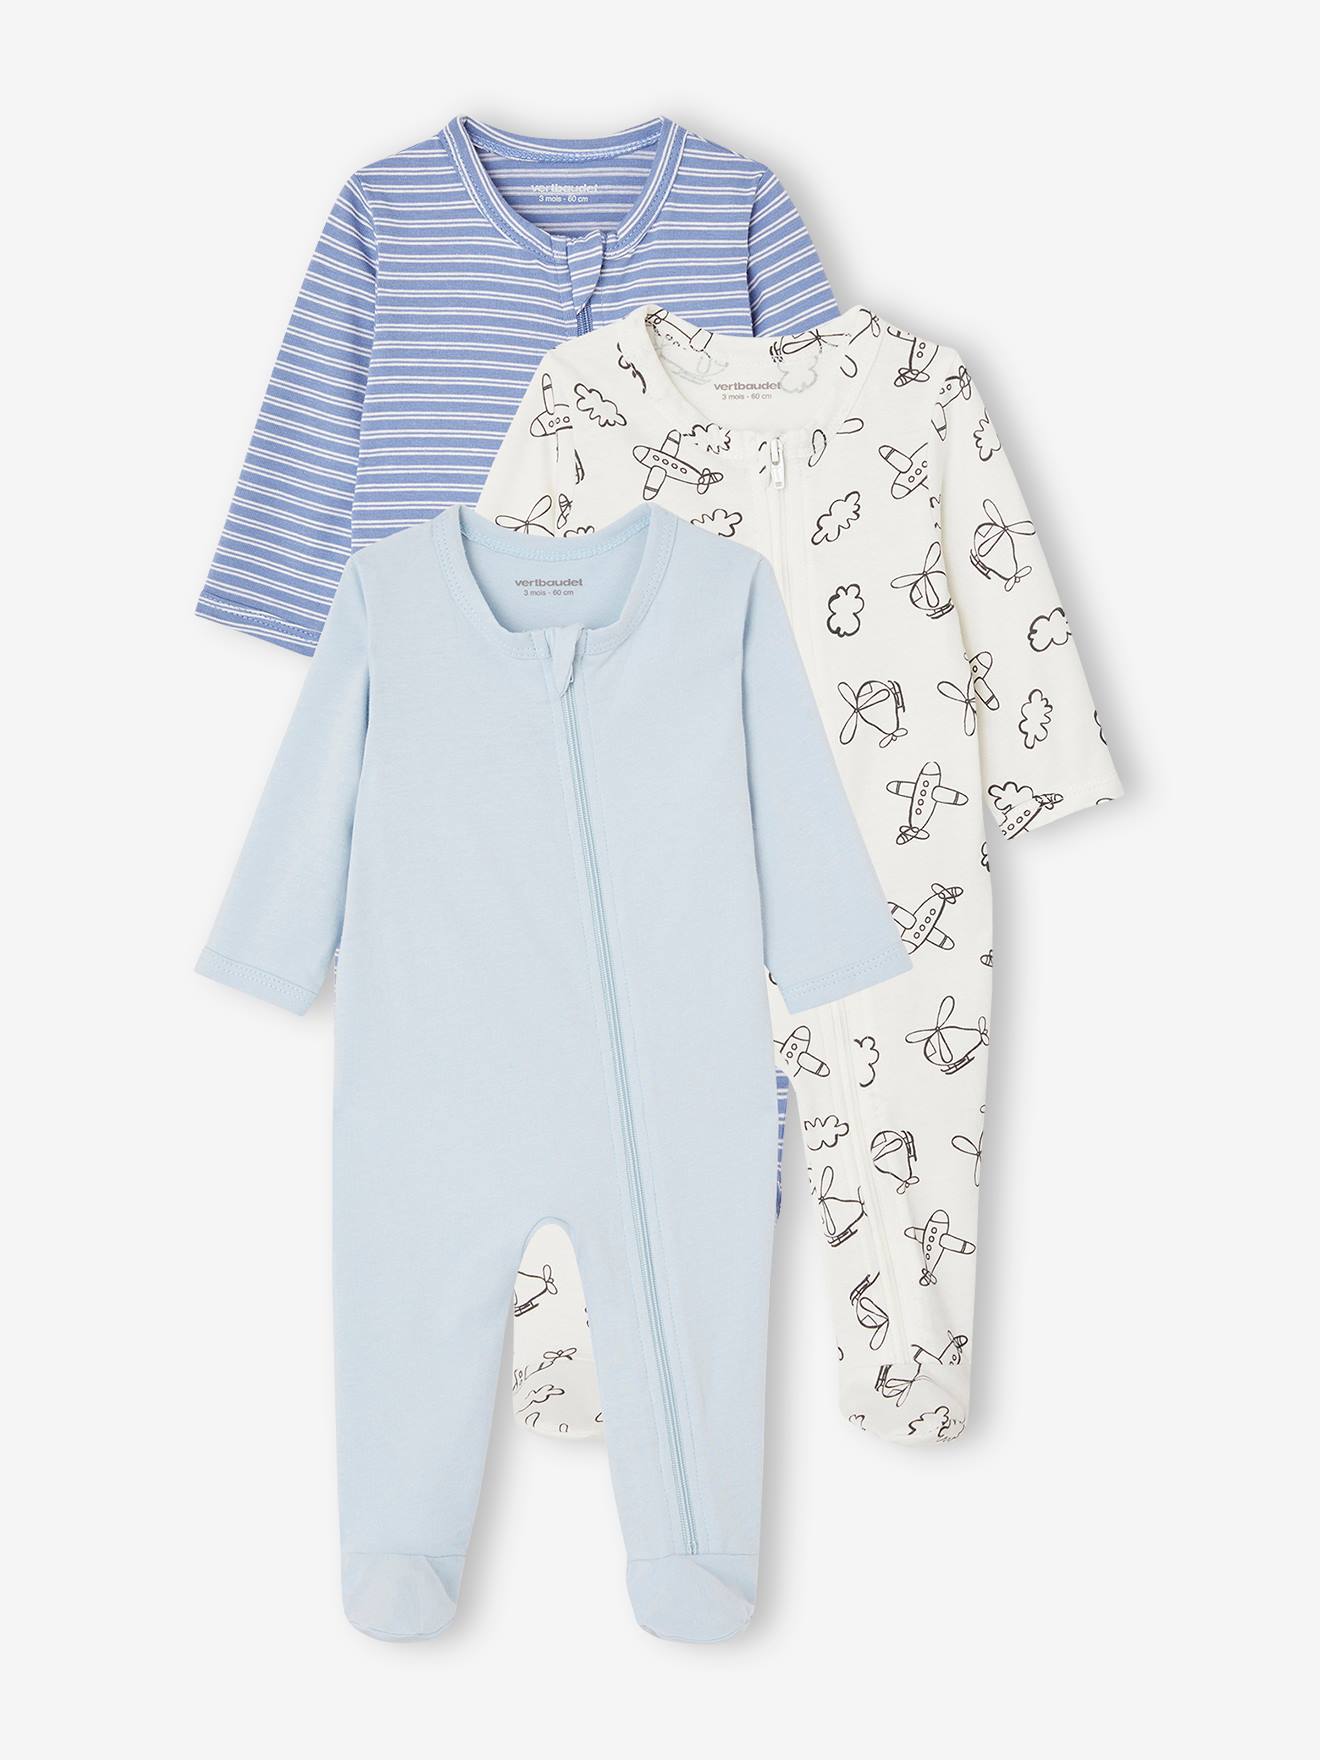 Pack of 3 BASICS Jersey Knit Sleepsuits with Zip Fastening, for Babies chambray blue